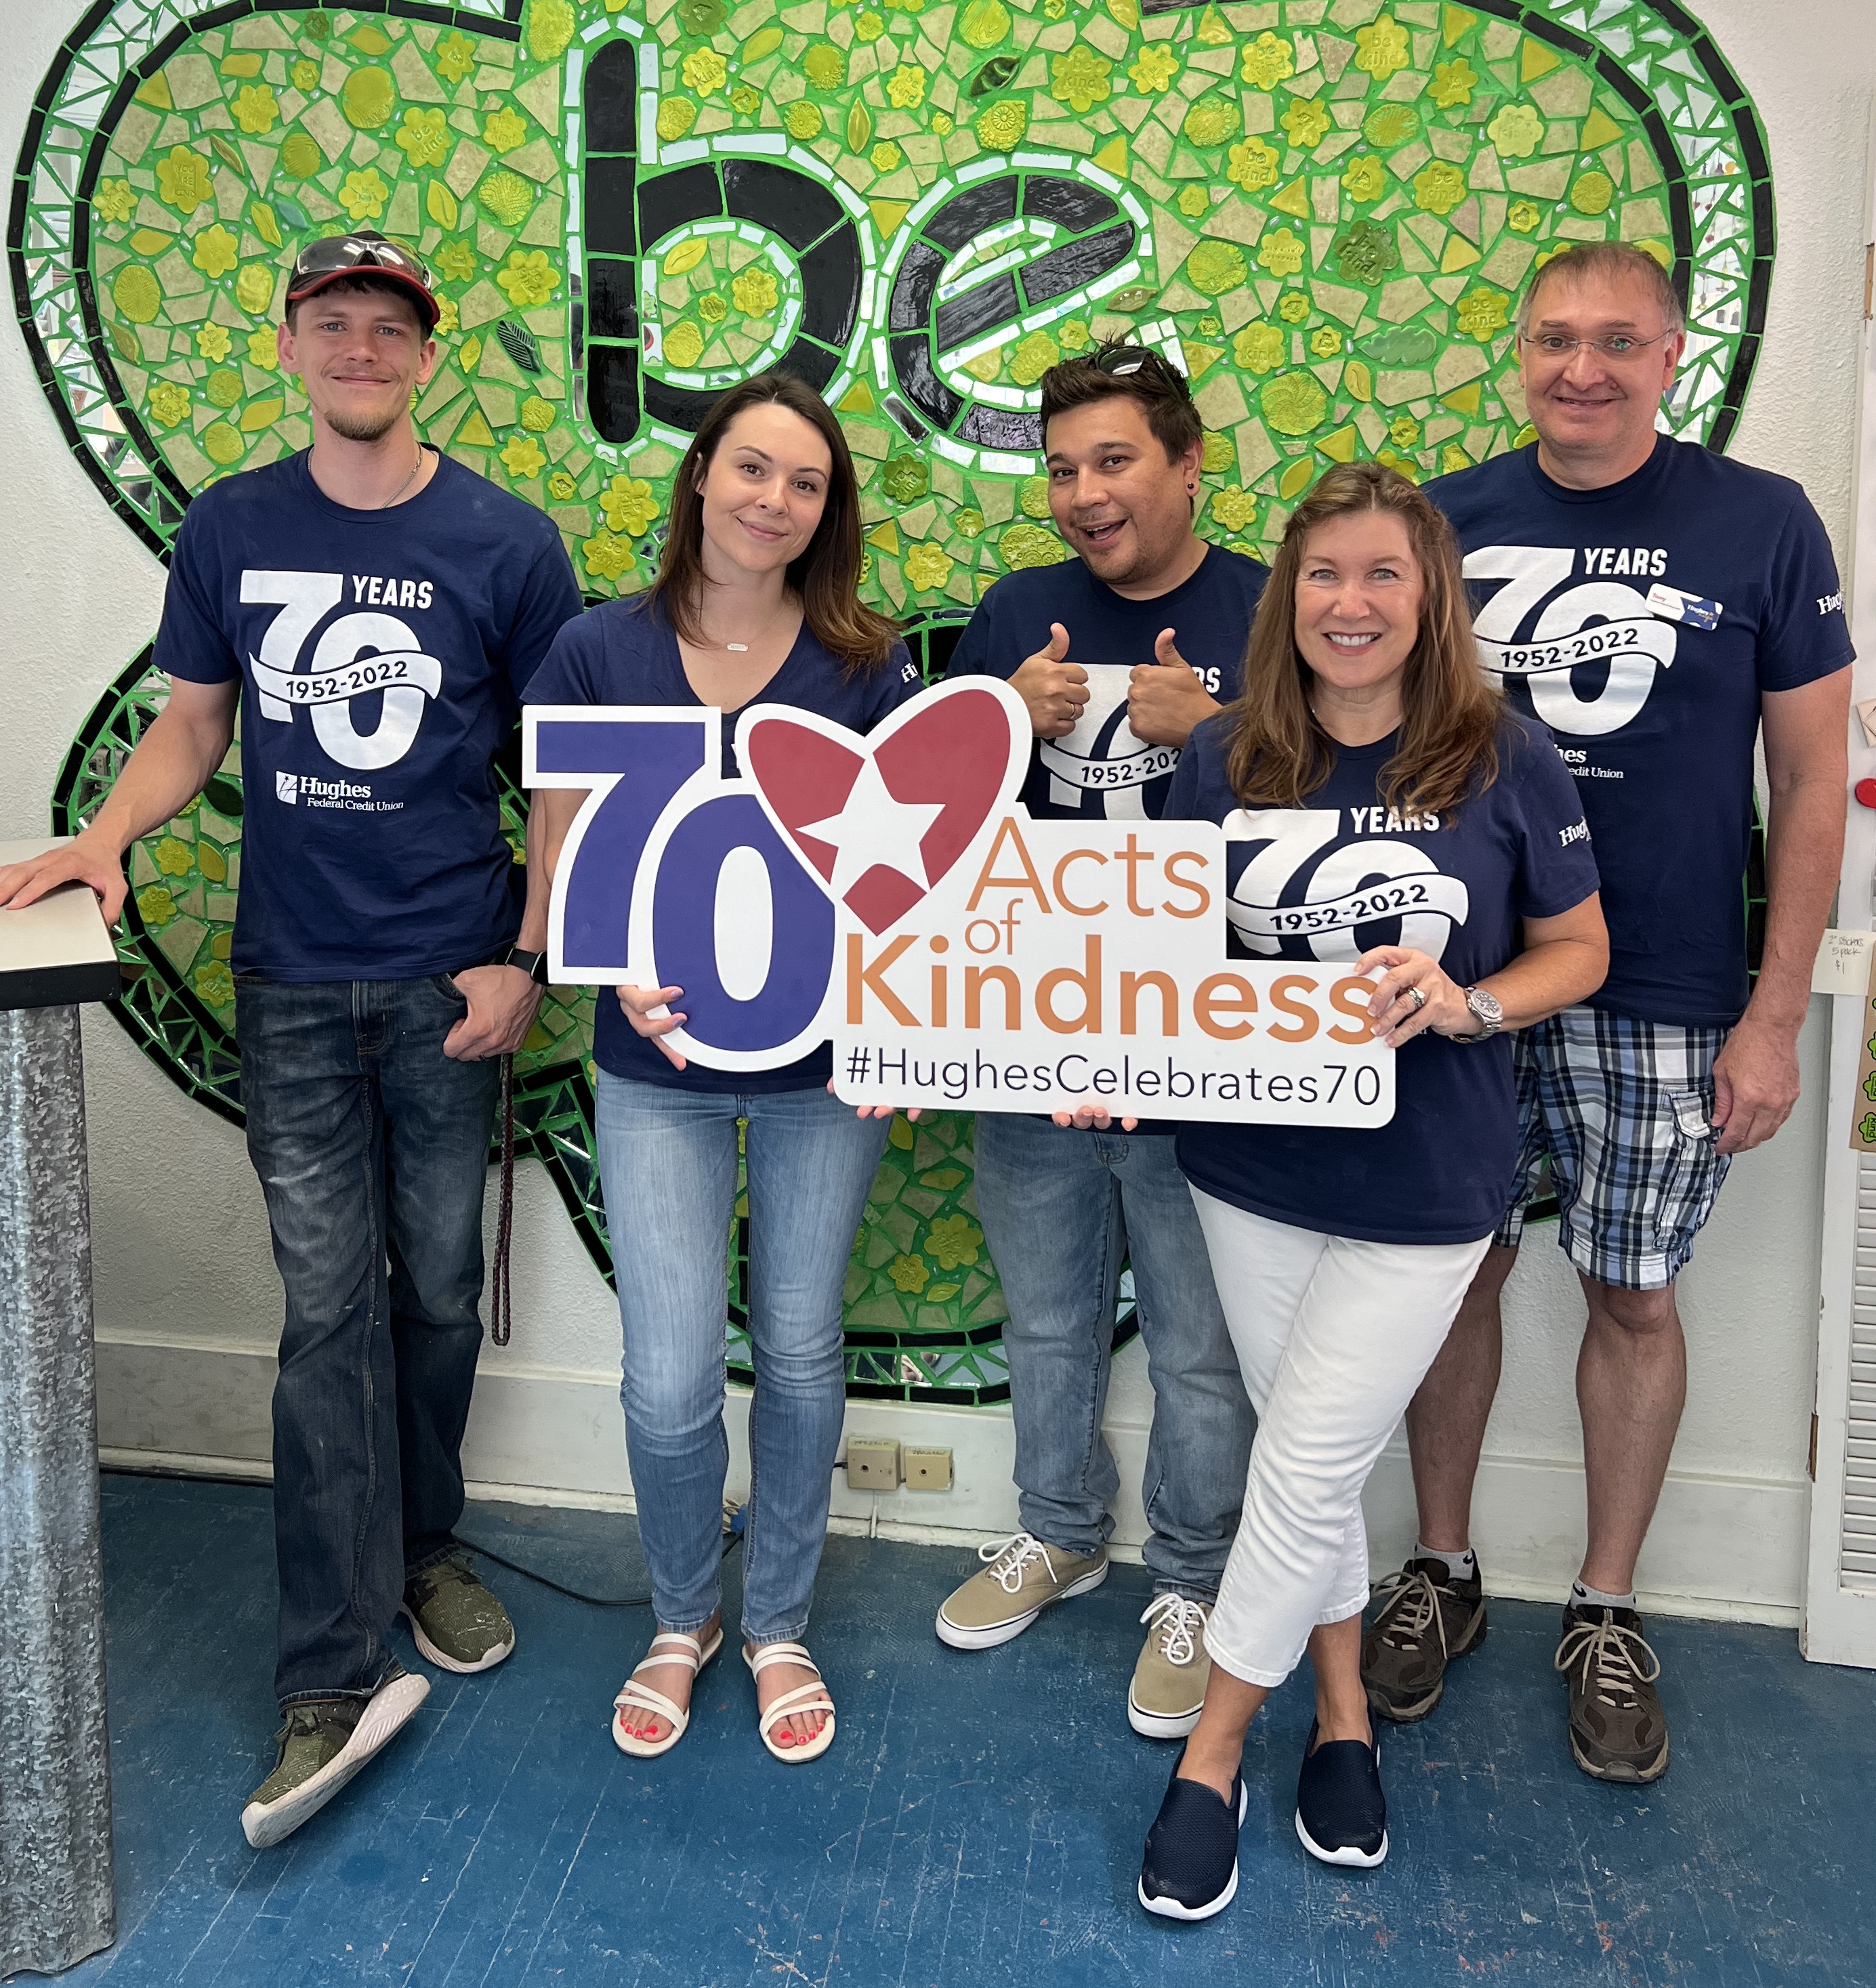 Hughes Team poses in front of Be Kind sign